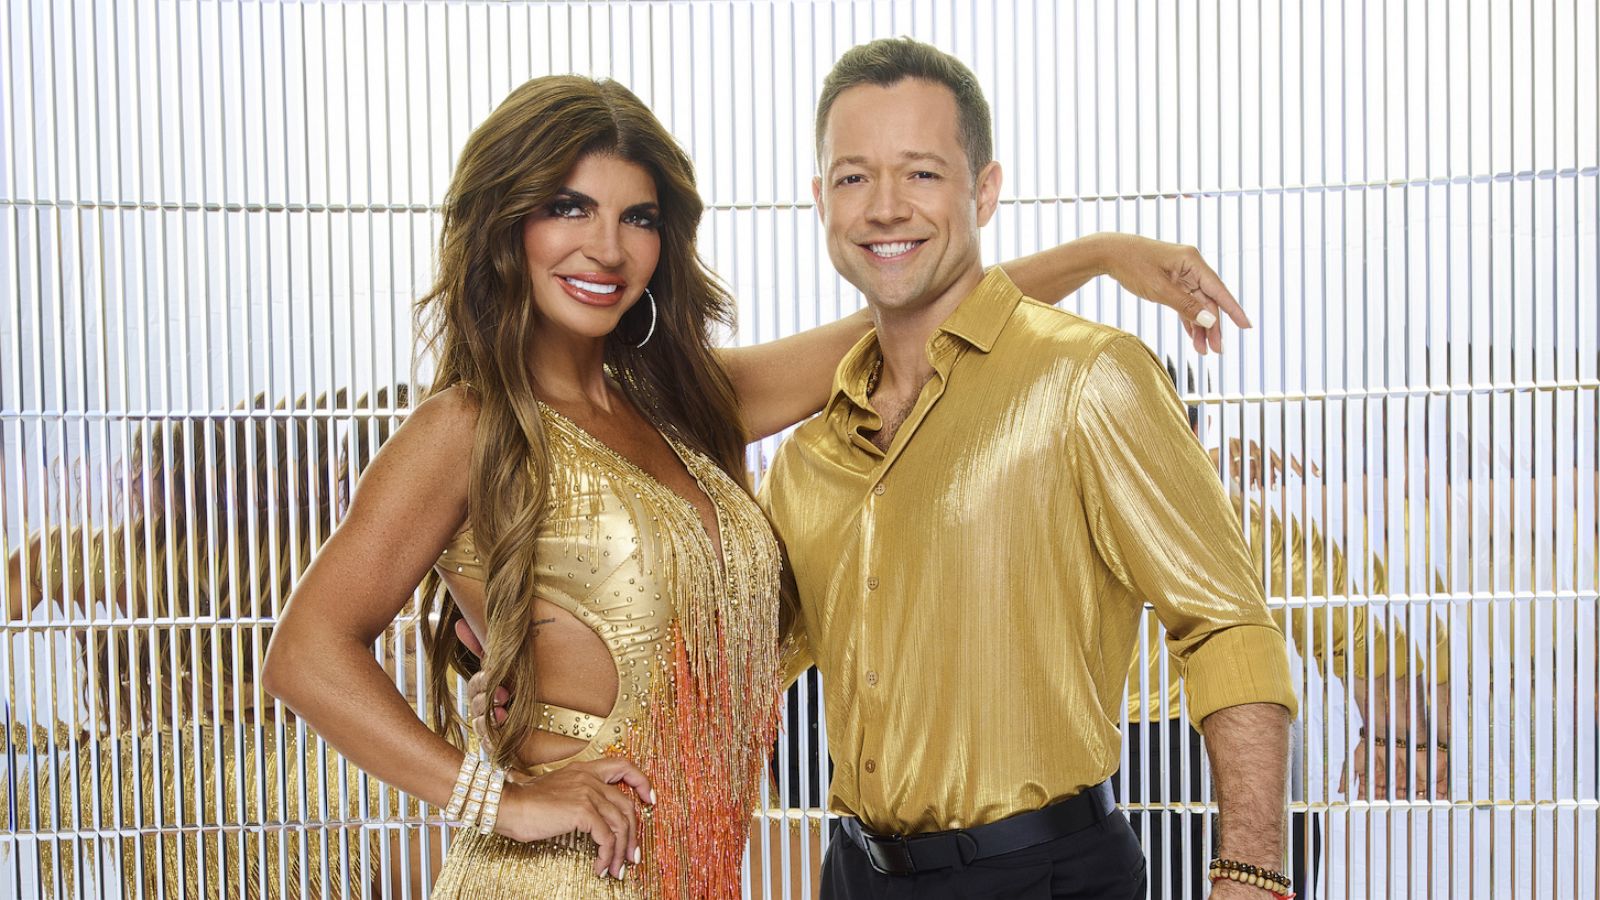 Dancing with the Stars' 2022: See the official season 31 partner photos Good Morning America